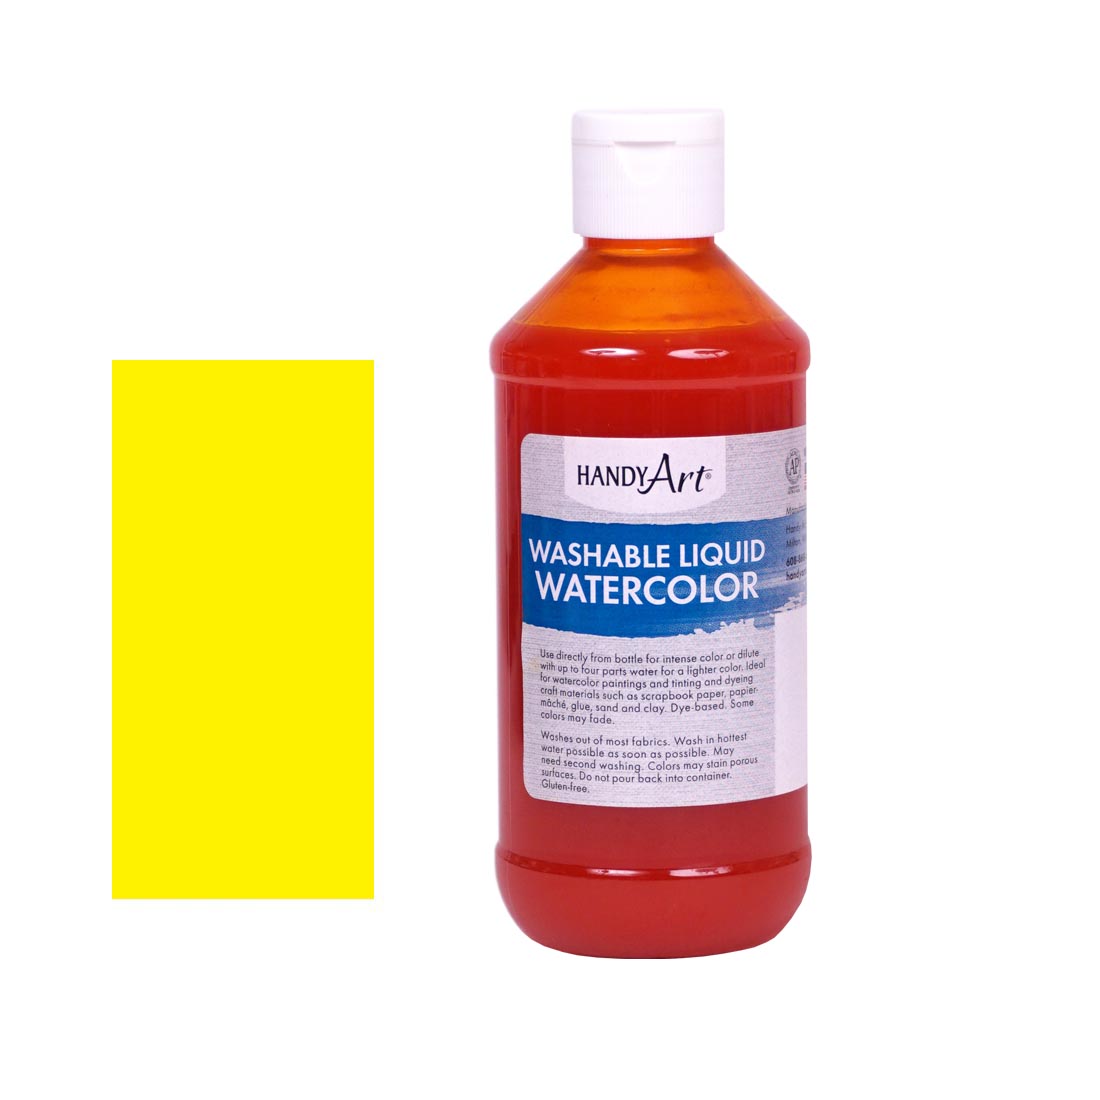 Bottle of Yellow Handy Art Washable Liquid Watercolor beside a rectangular color swatch